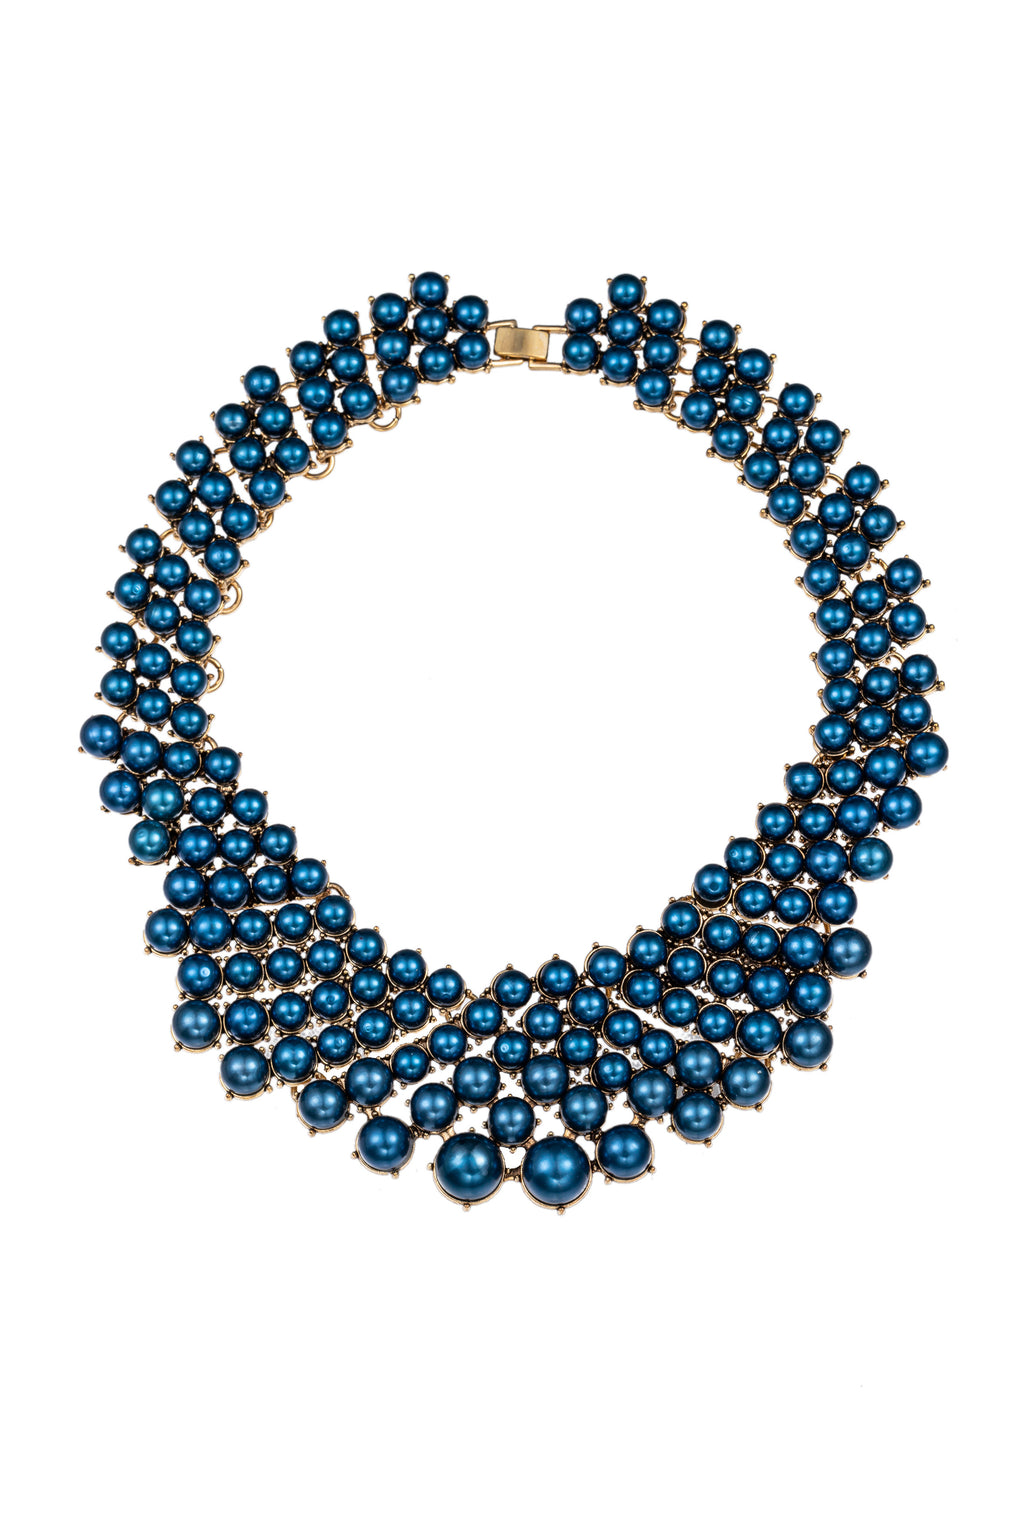 Blue alloy statement necklace studded with glass pearls.